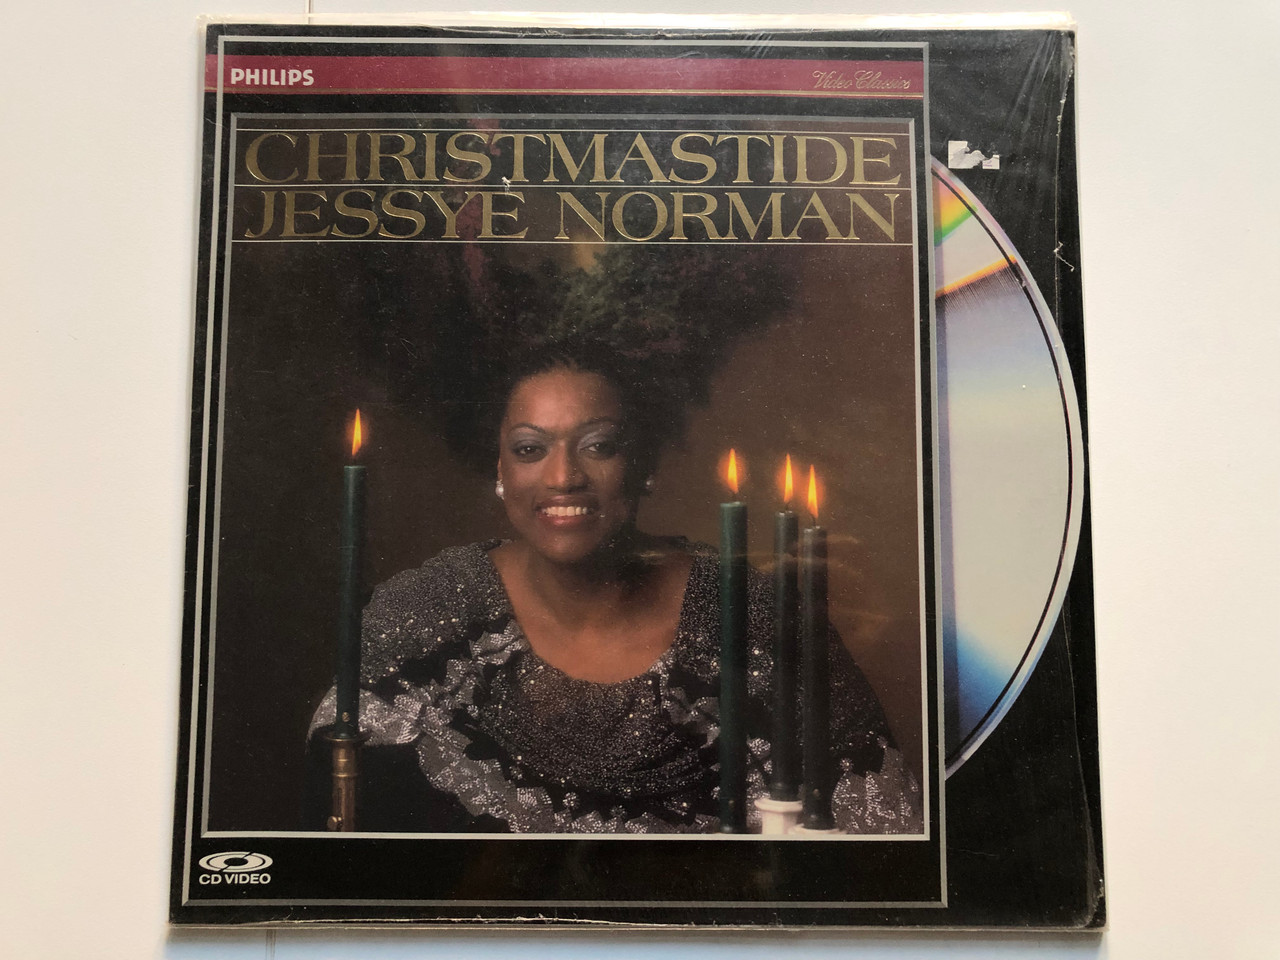 Jessye Norman – Christmastide / Laser Disc VD Video 1988 - Bible in My  Language